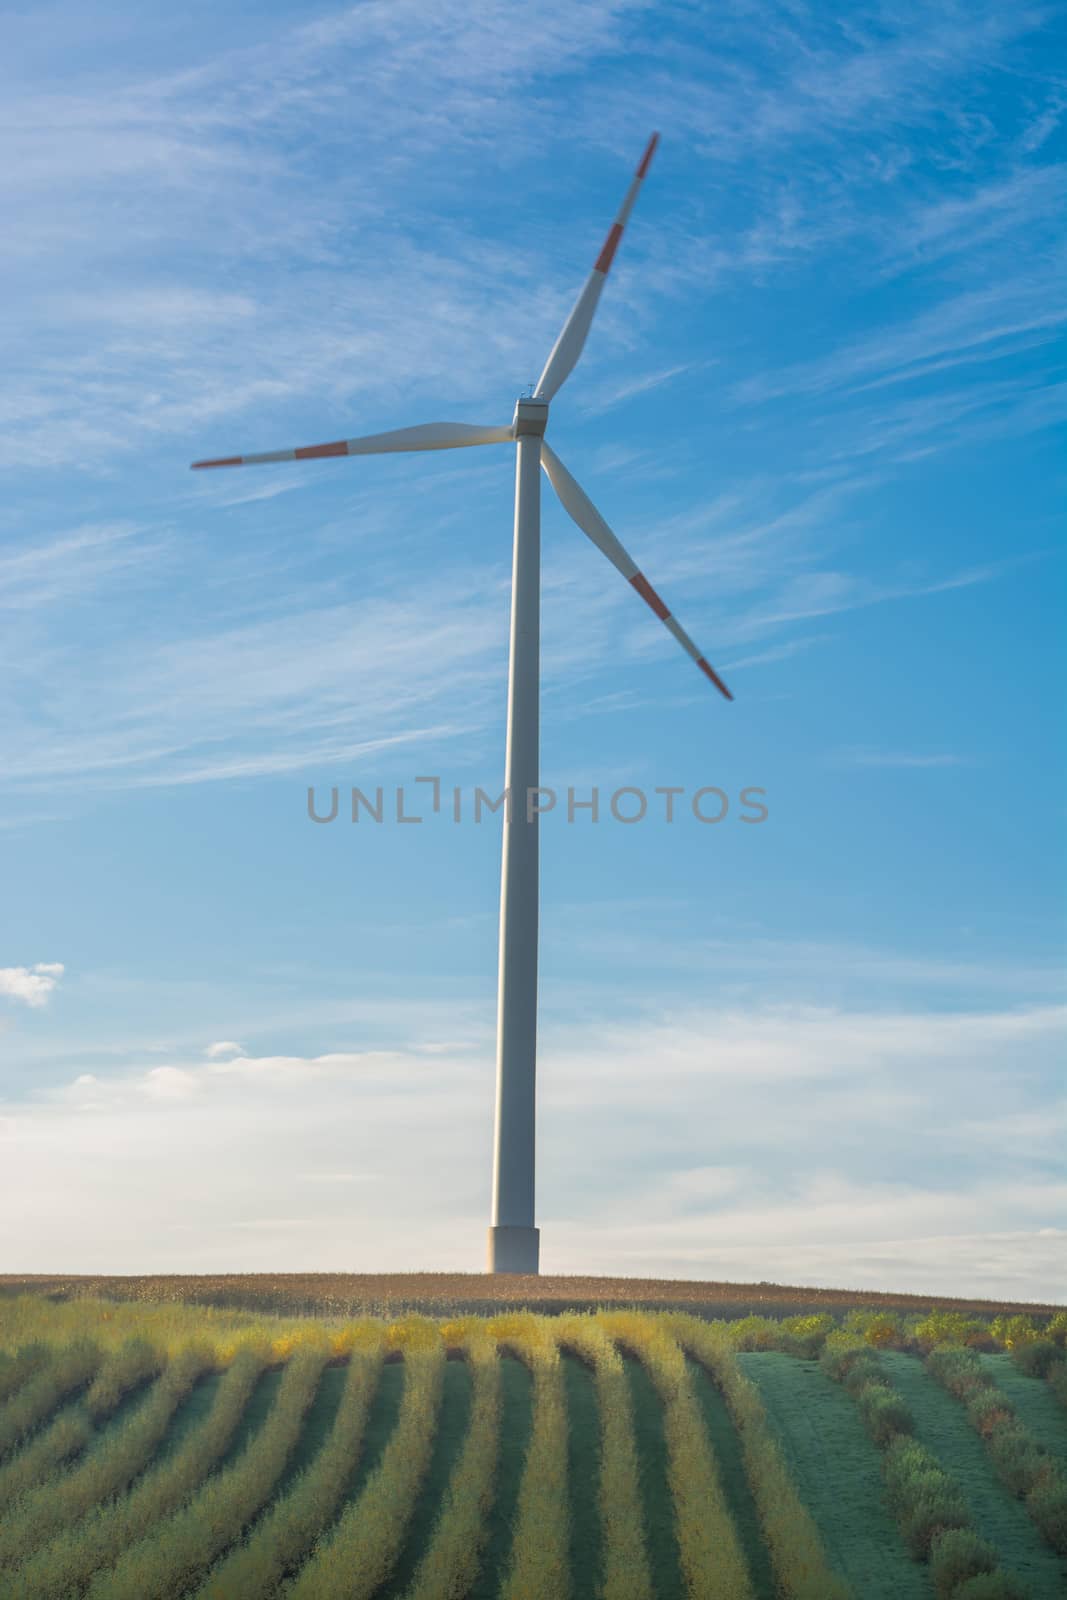 

Plants put in a row, in the background of blue white horizon and a wind turbine.